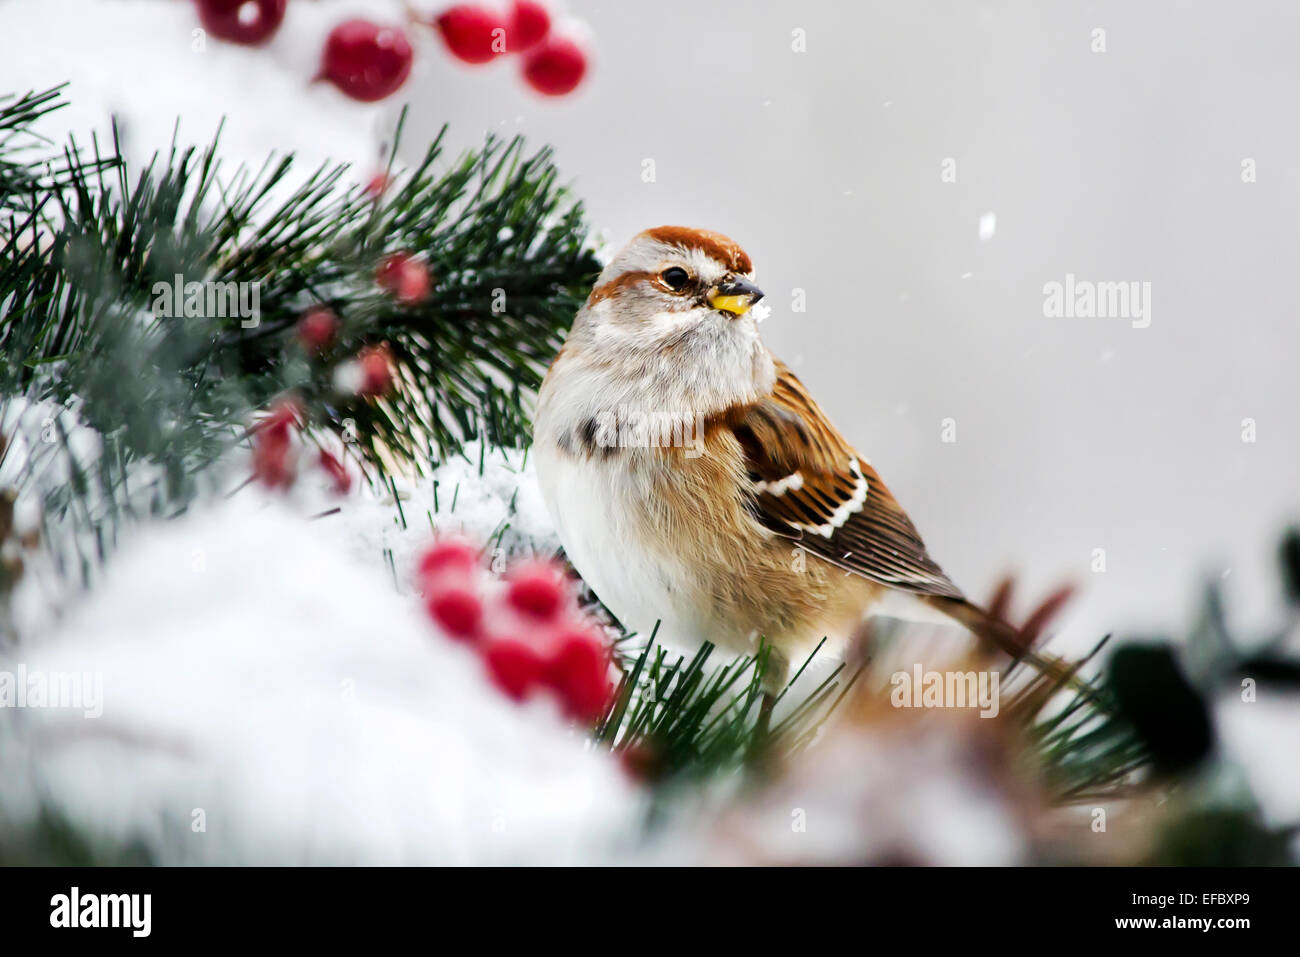 American Tree Sparrow bird in snow with red berries and pine. Stock Photo